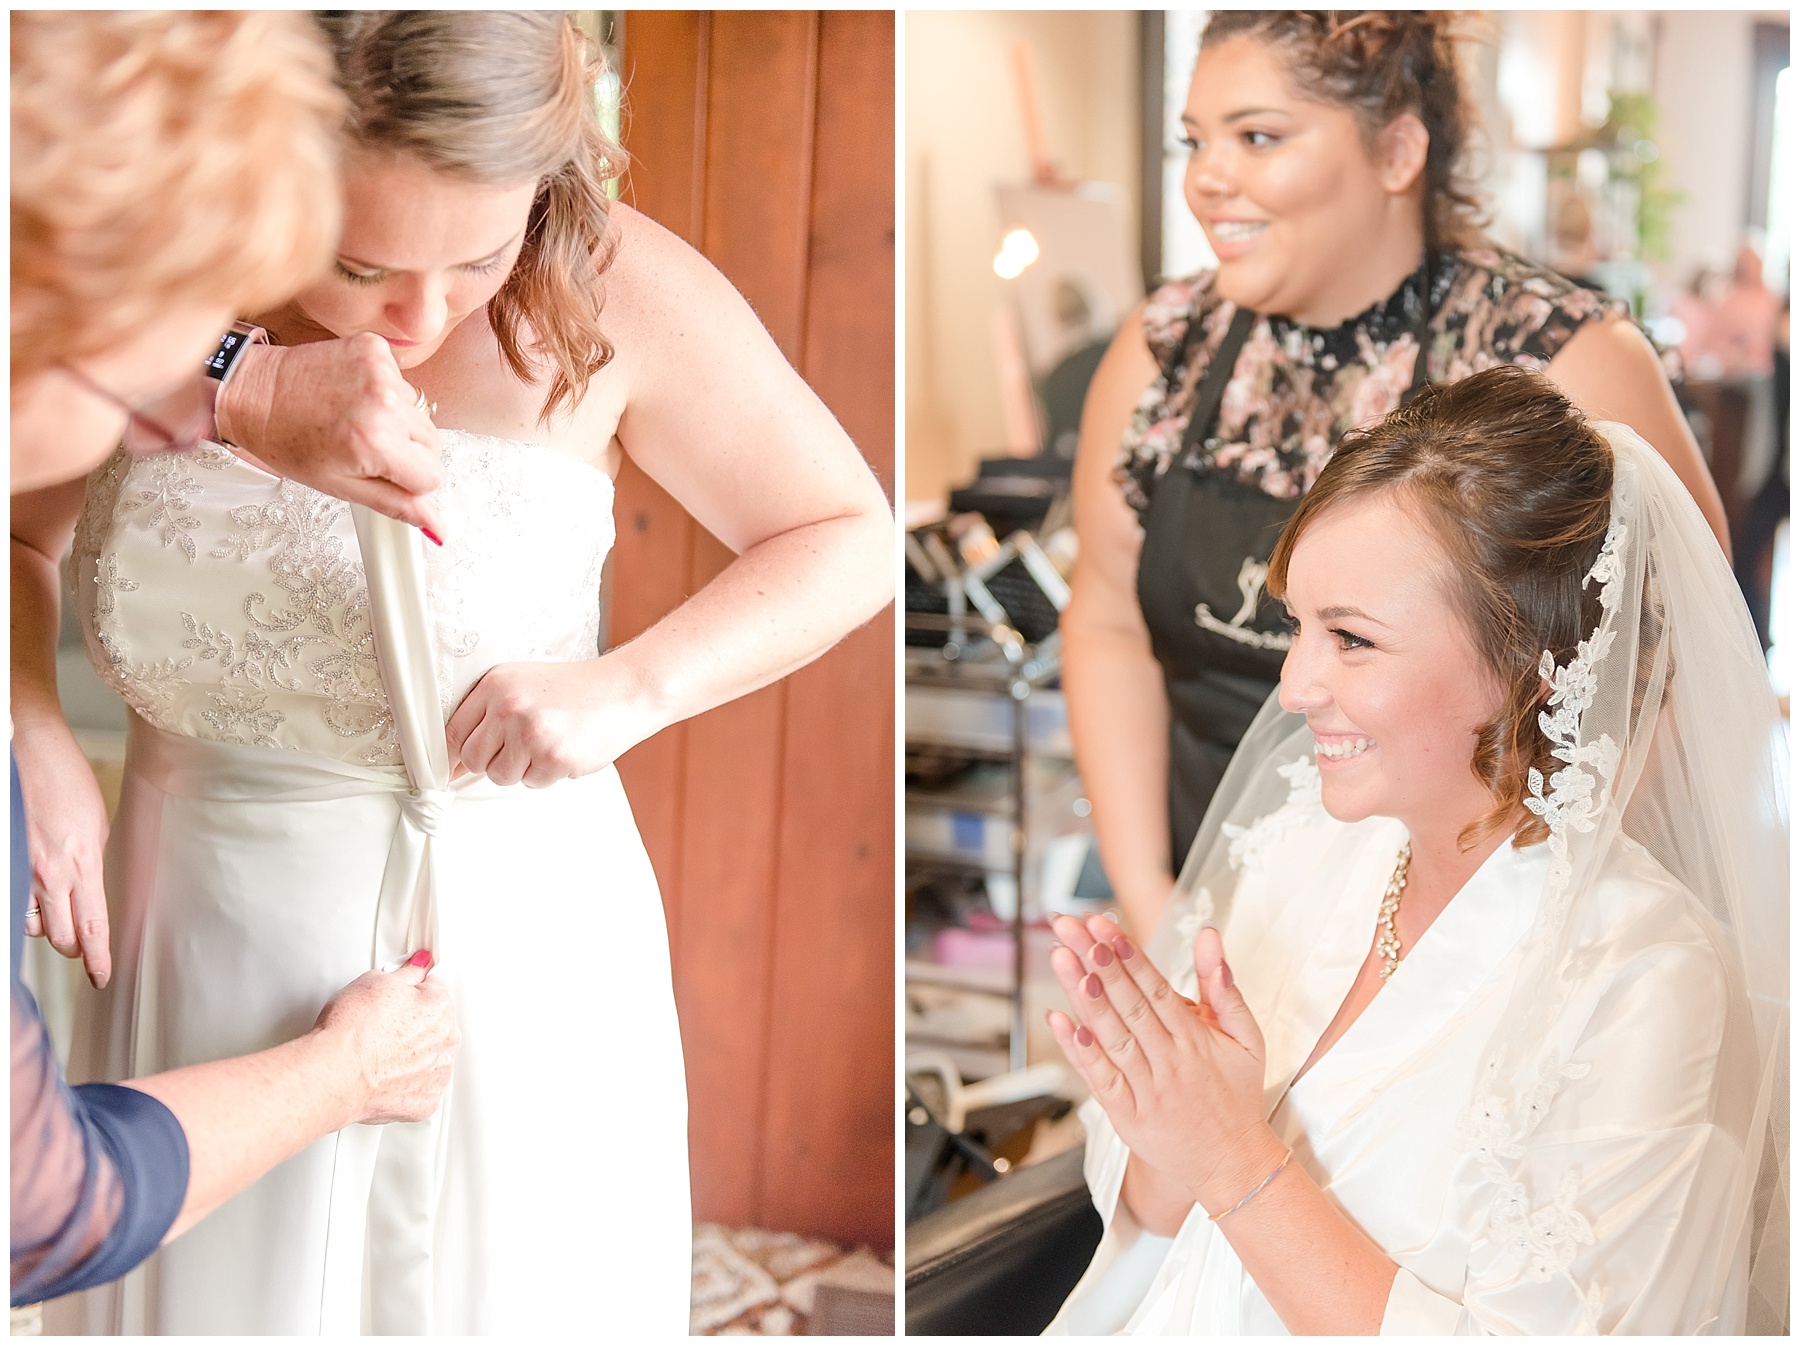 Bride laughing after putting veil in her hair in 2018 wedding photography favorites